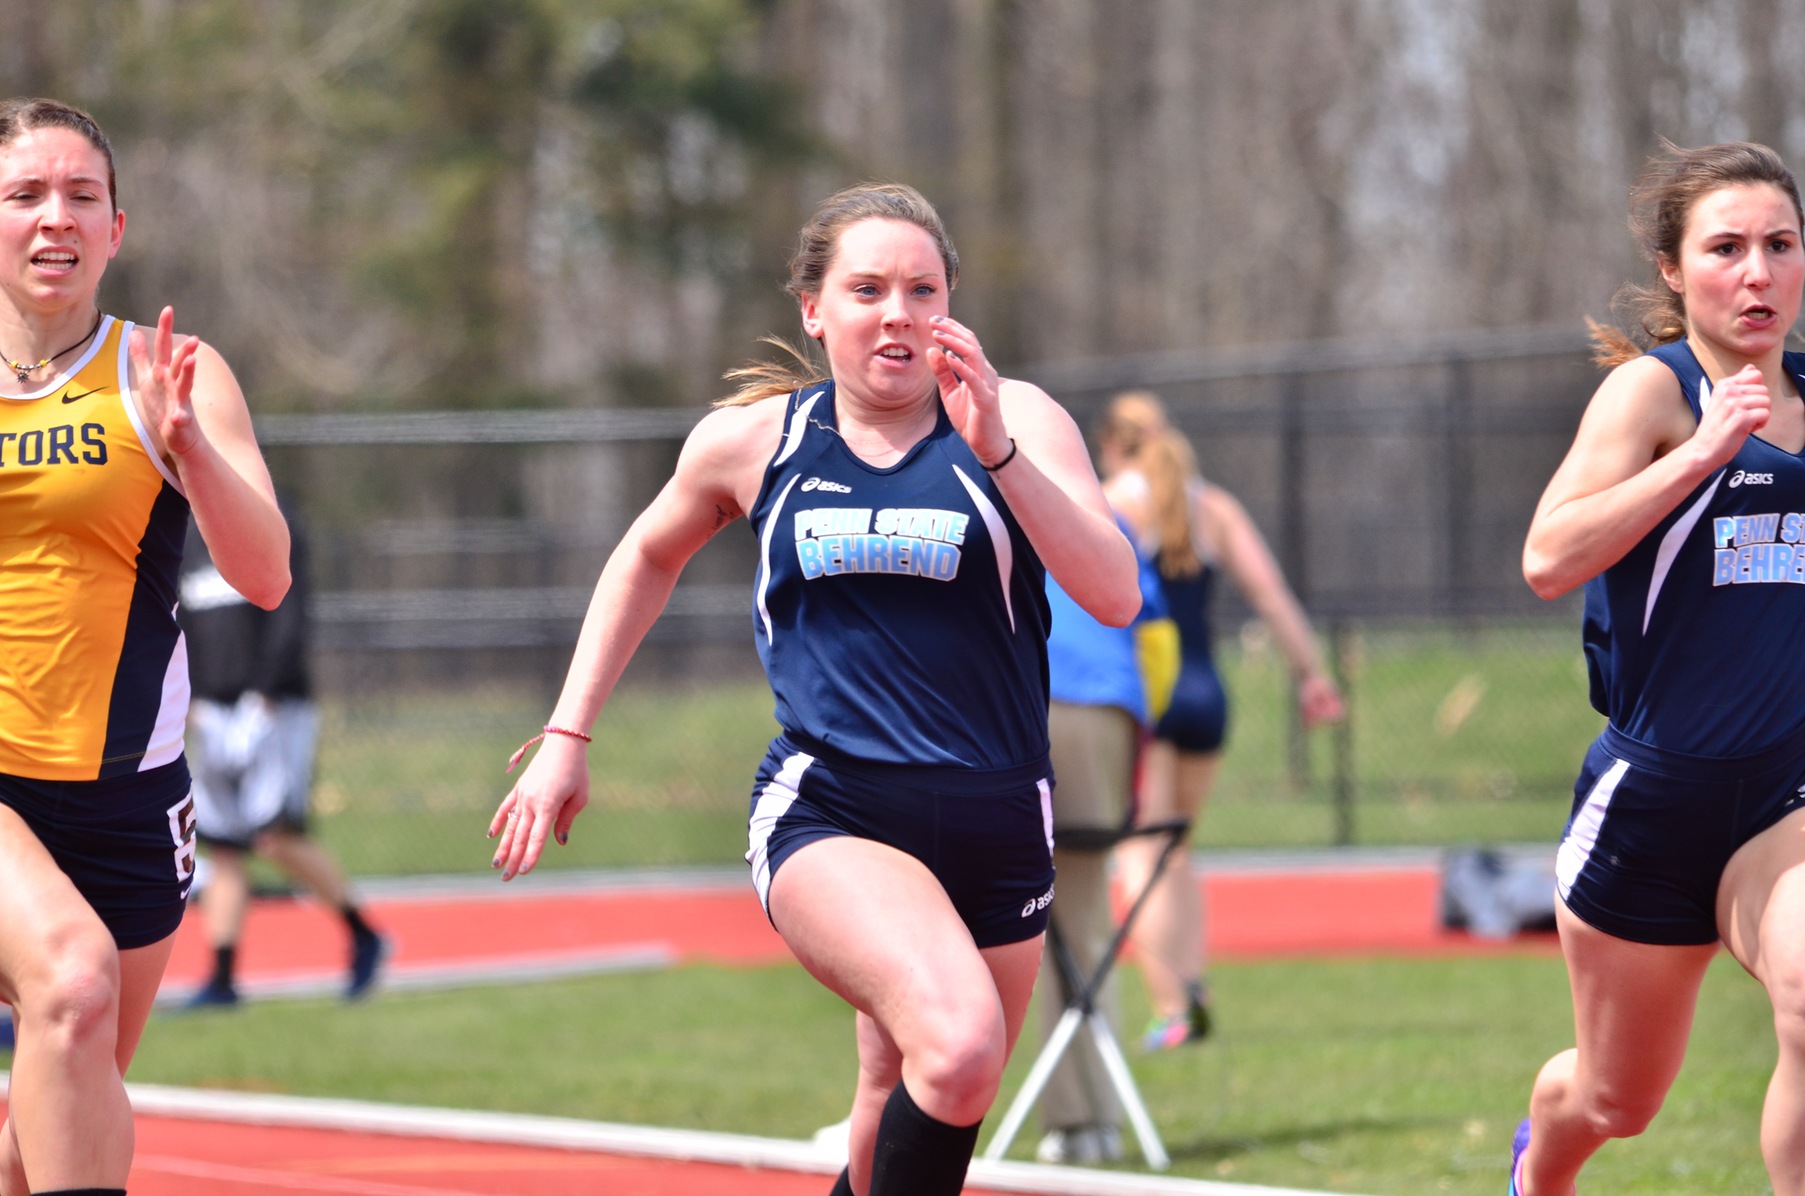 Track and Field Set to Compete in SRU Open Thursday